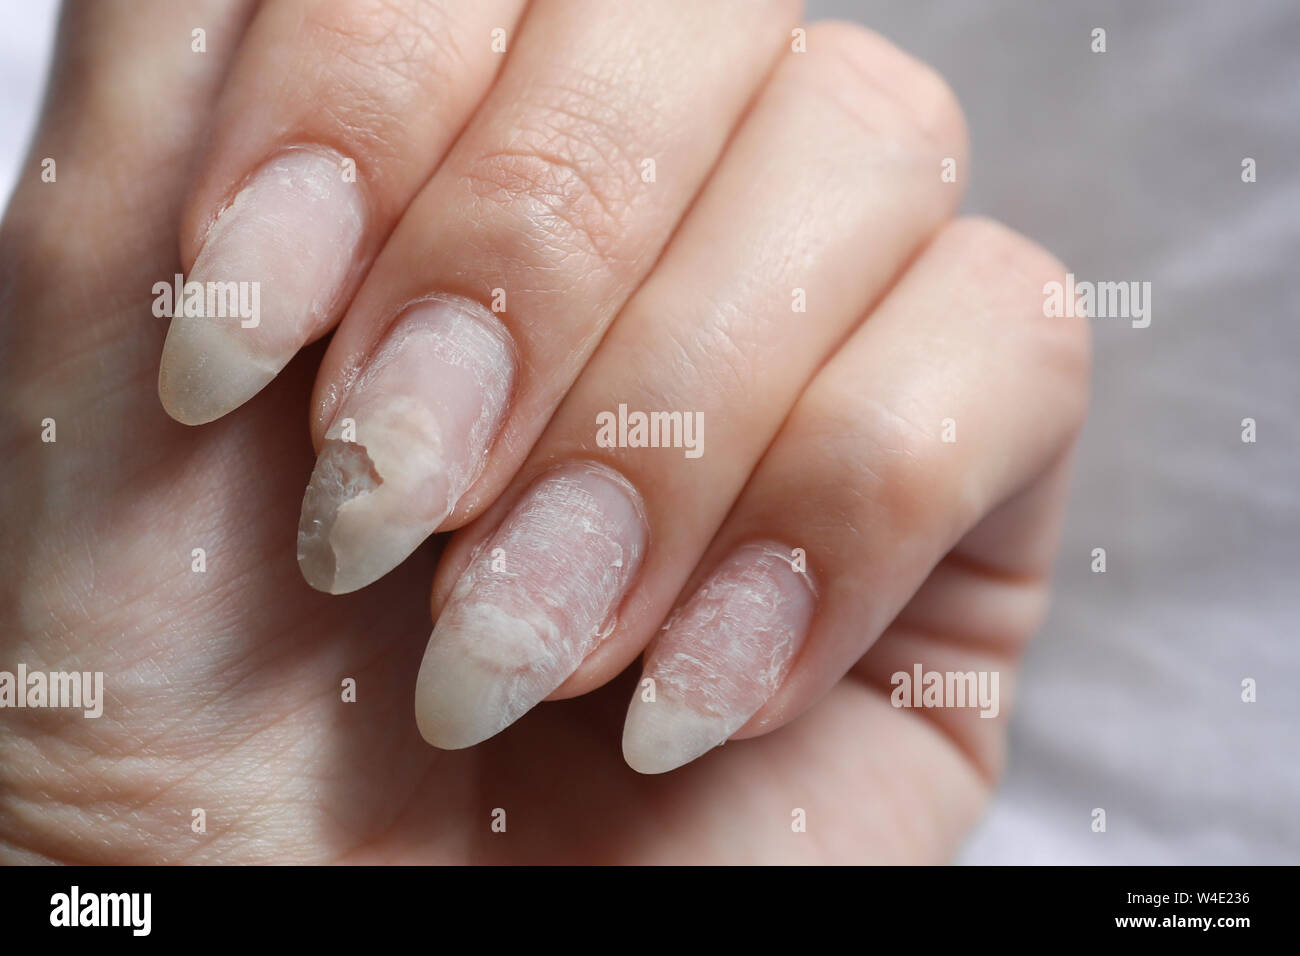 Damage of the nail after using shellac. Stock Photo